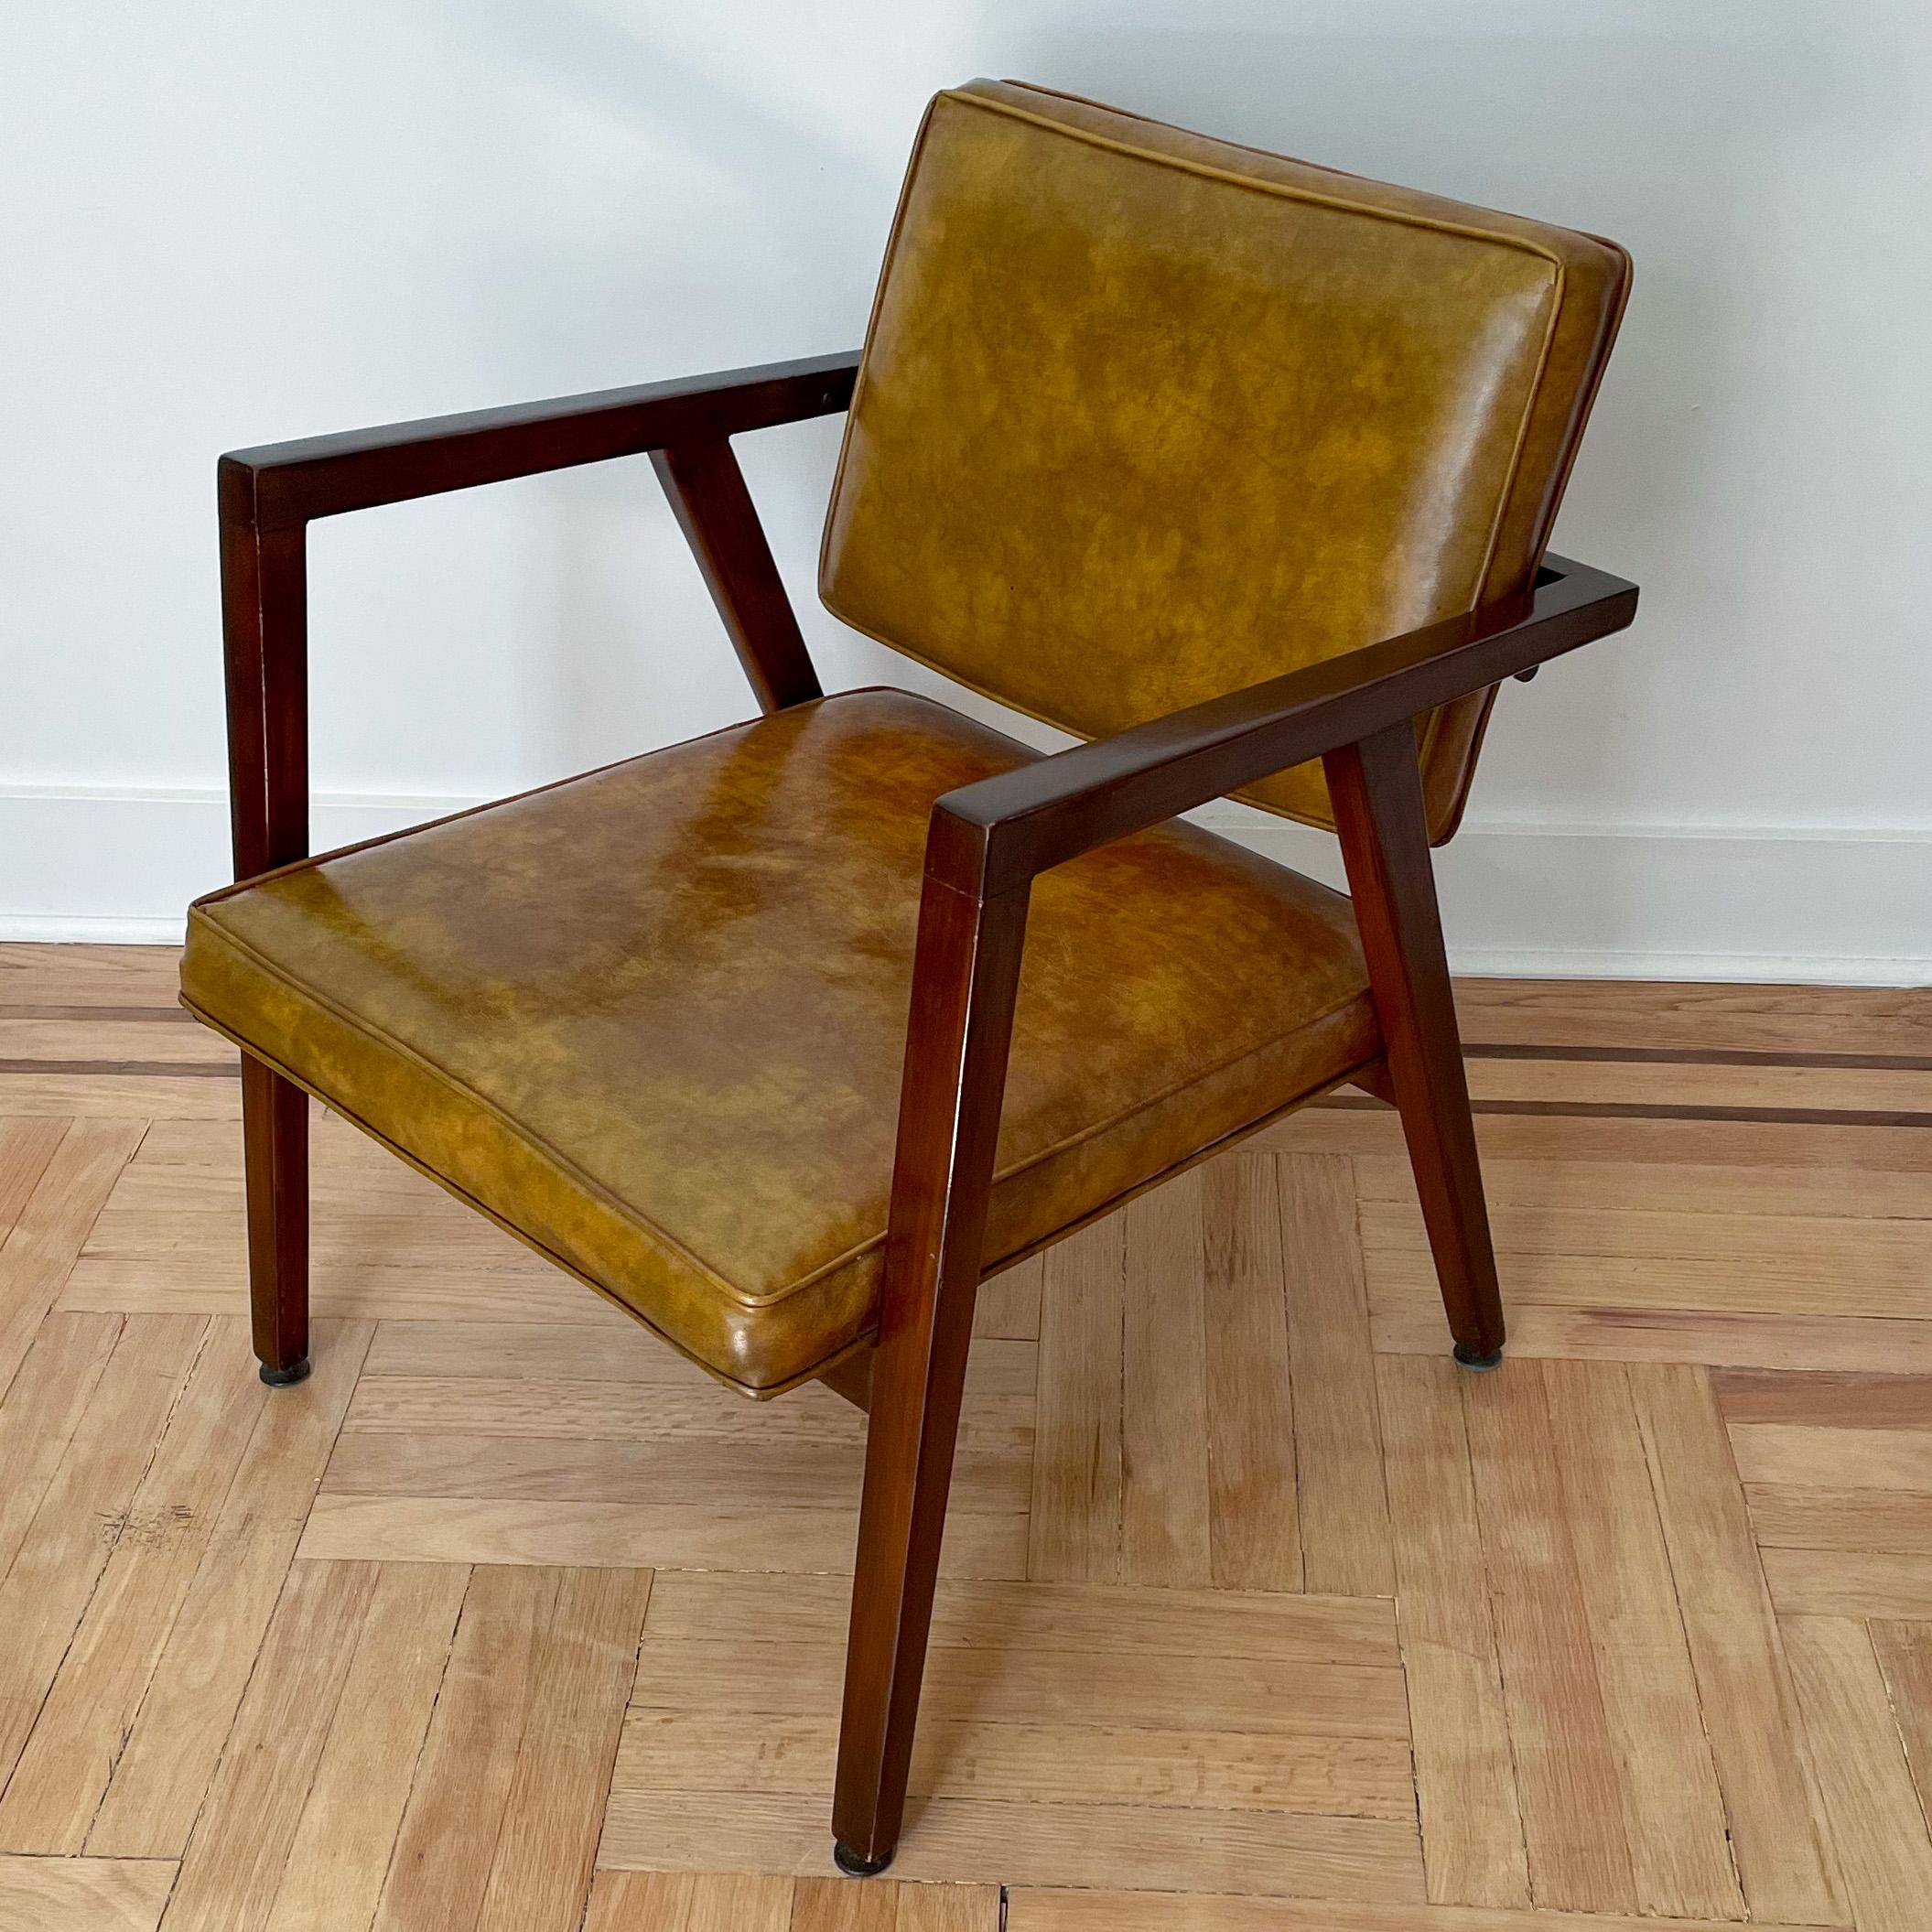 Lounge chair, model 49, designed by Franco Albini and produced by Knoll from 1949 until about 1967. This example circa 1950’s. Slender walnut frame with distinctive wrap-around arms, offset and angled rear legs, and steel fasteners. The